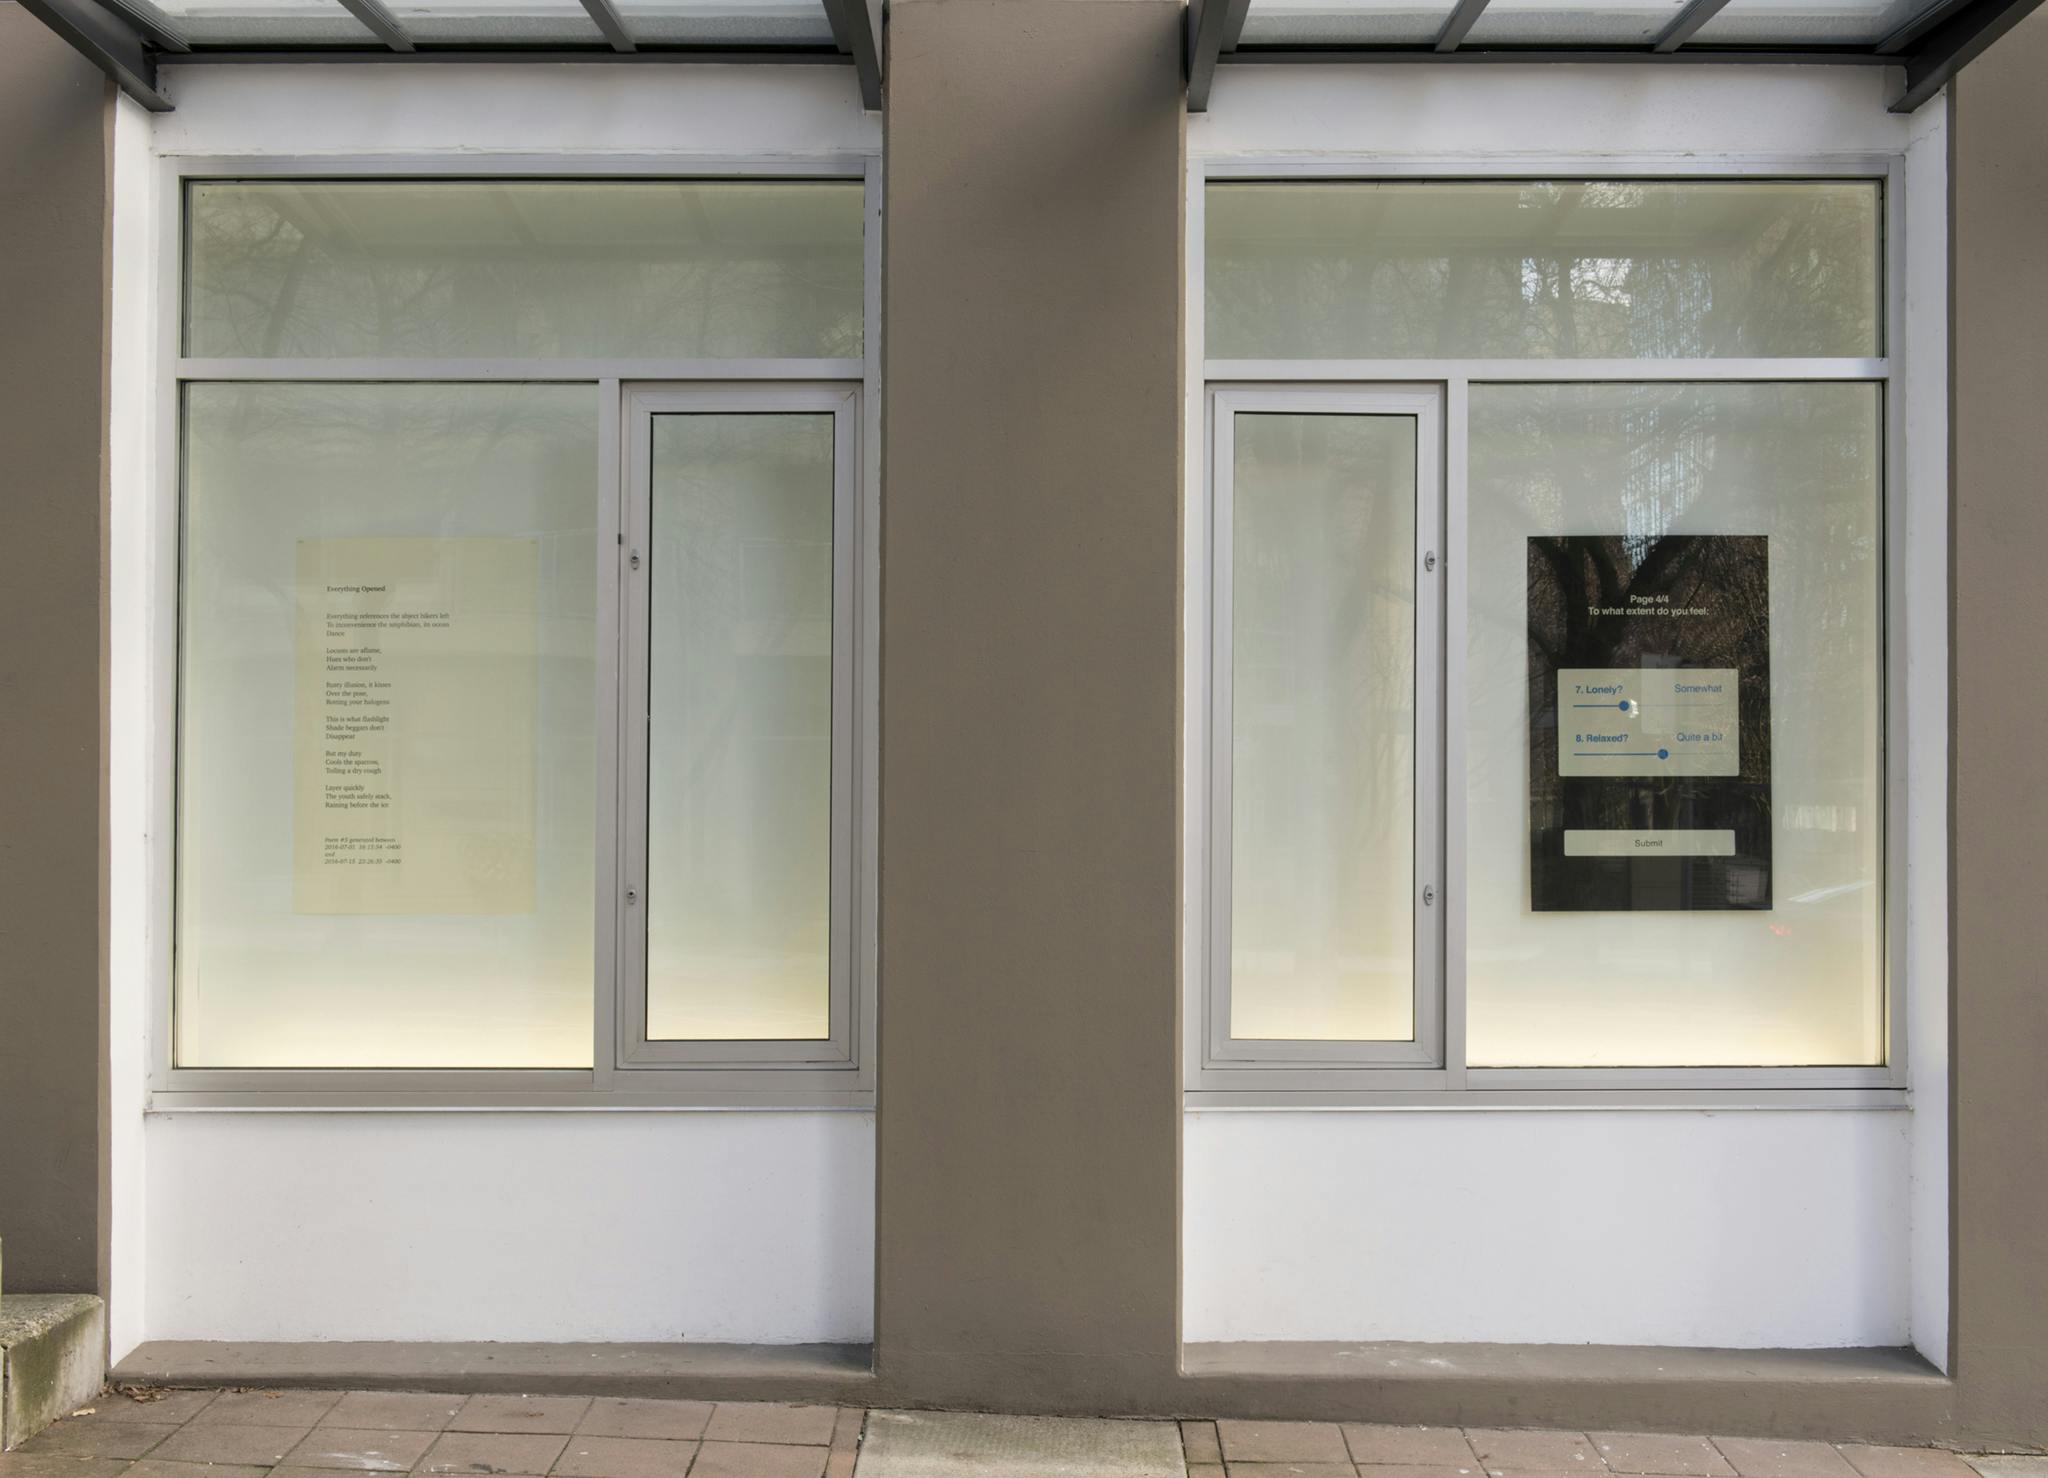 Two windows outside of CAG installed with a text-based print each. One print has a poem printed in black text on white paper. The other has a poem printed in white text on back paper.